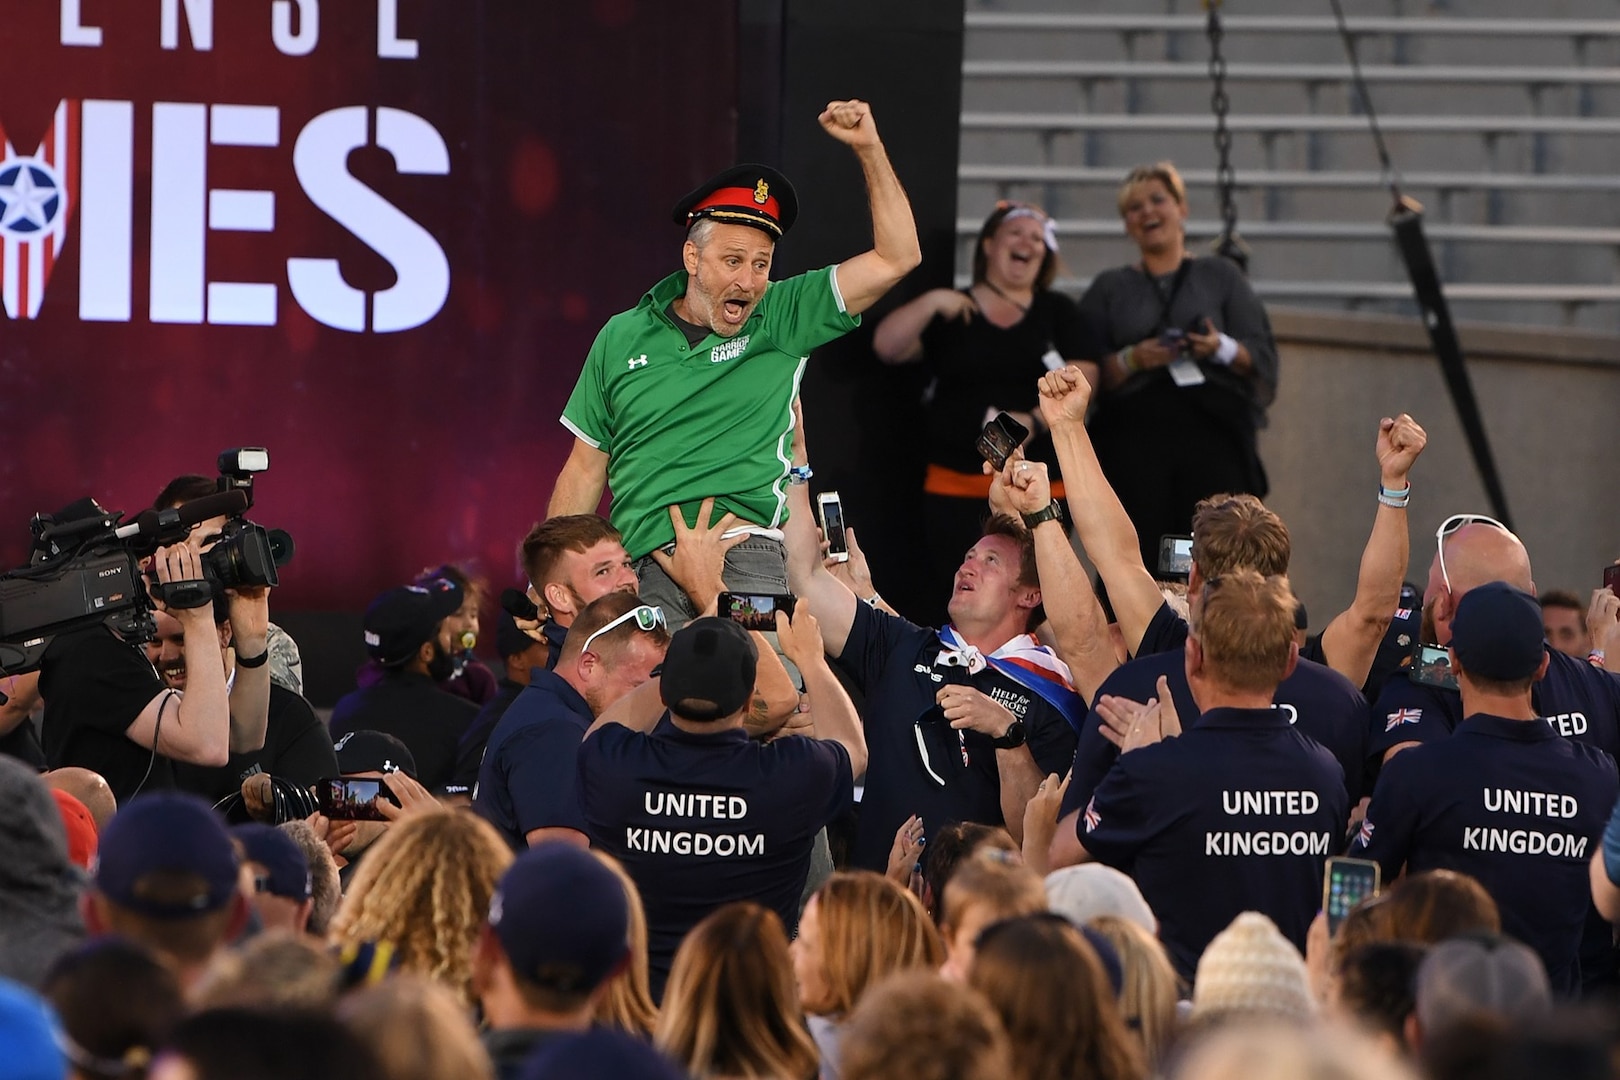 Movie and television personality Jon Stewart gets a lift by Team United Kingdom while hosting opening ceremonies for the 2018 Warrior Games at the U.S. Air Force Academy in Colorado Springs, Colo., June 2, 2018. DoD photo by EJ Hersom